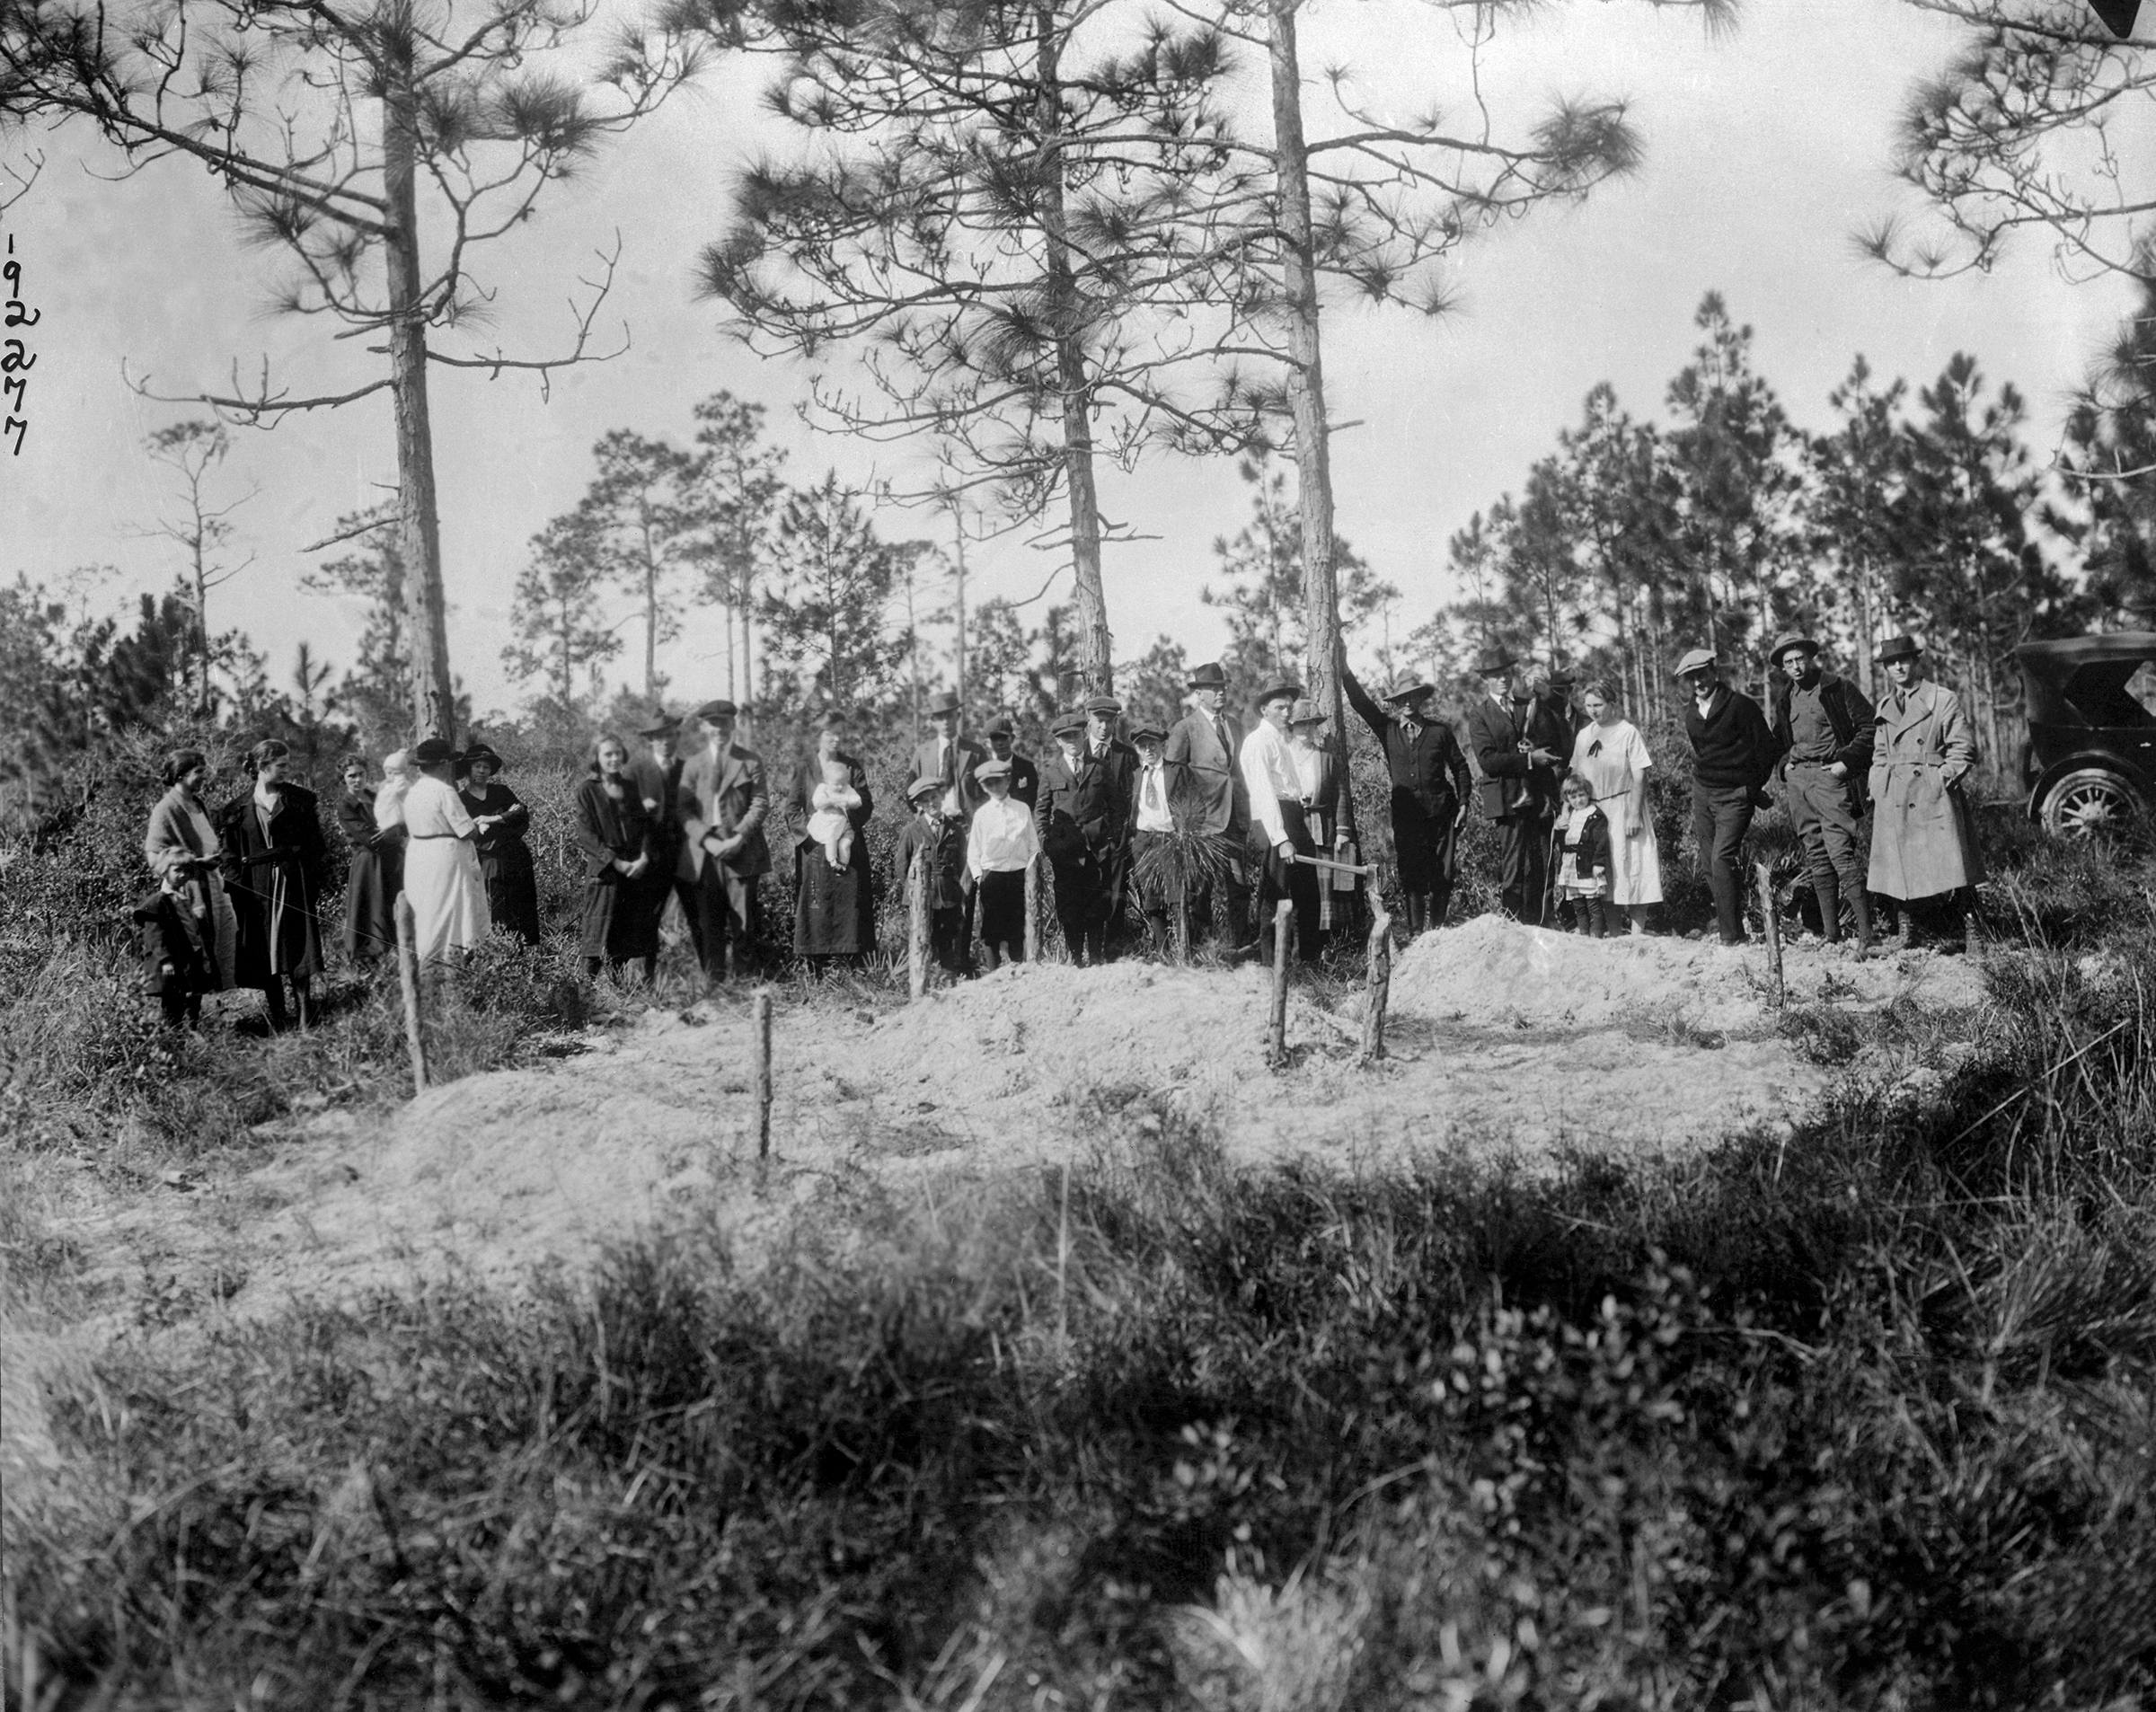 White residents of Sumner stand near three graves of six Black victims who were killed in Rosewood. (Bettmann Archive/Getty Images)